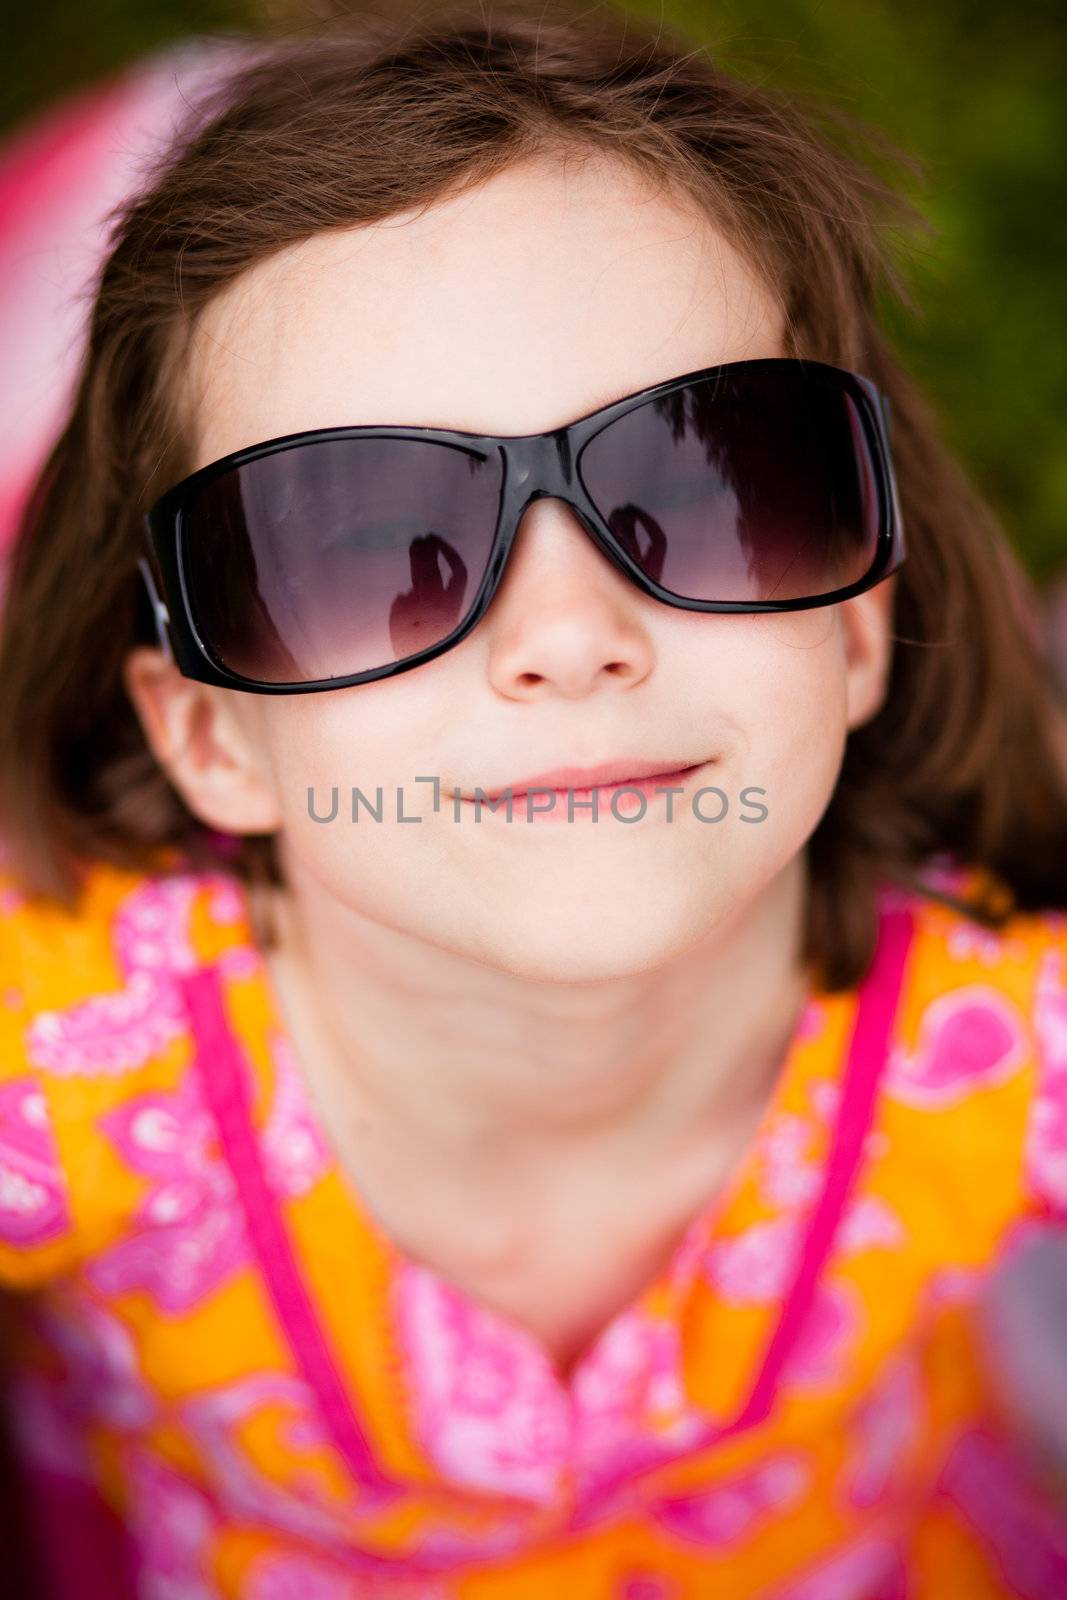 Girl with sunglasses by Talanis